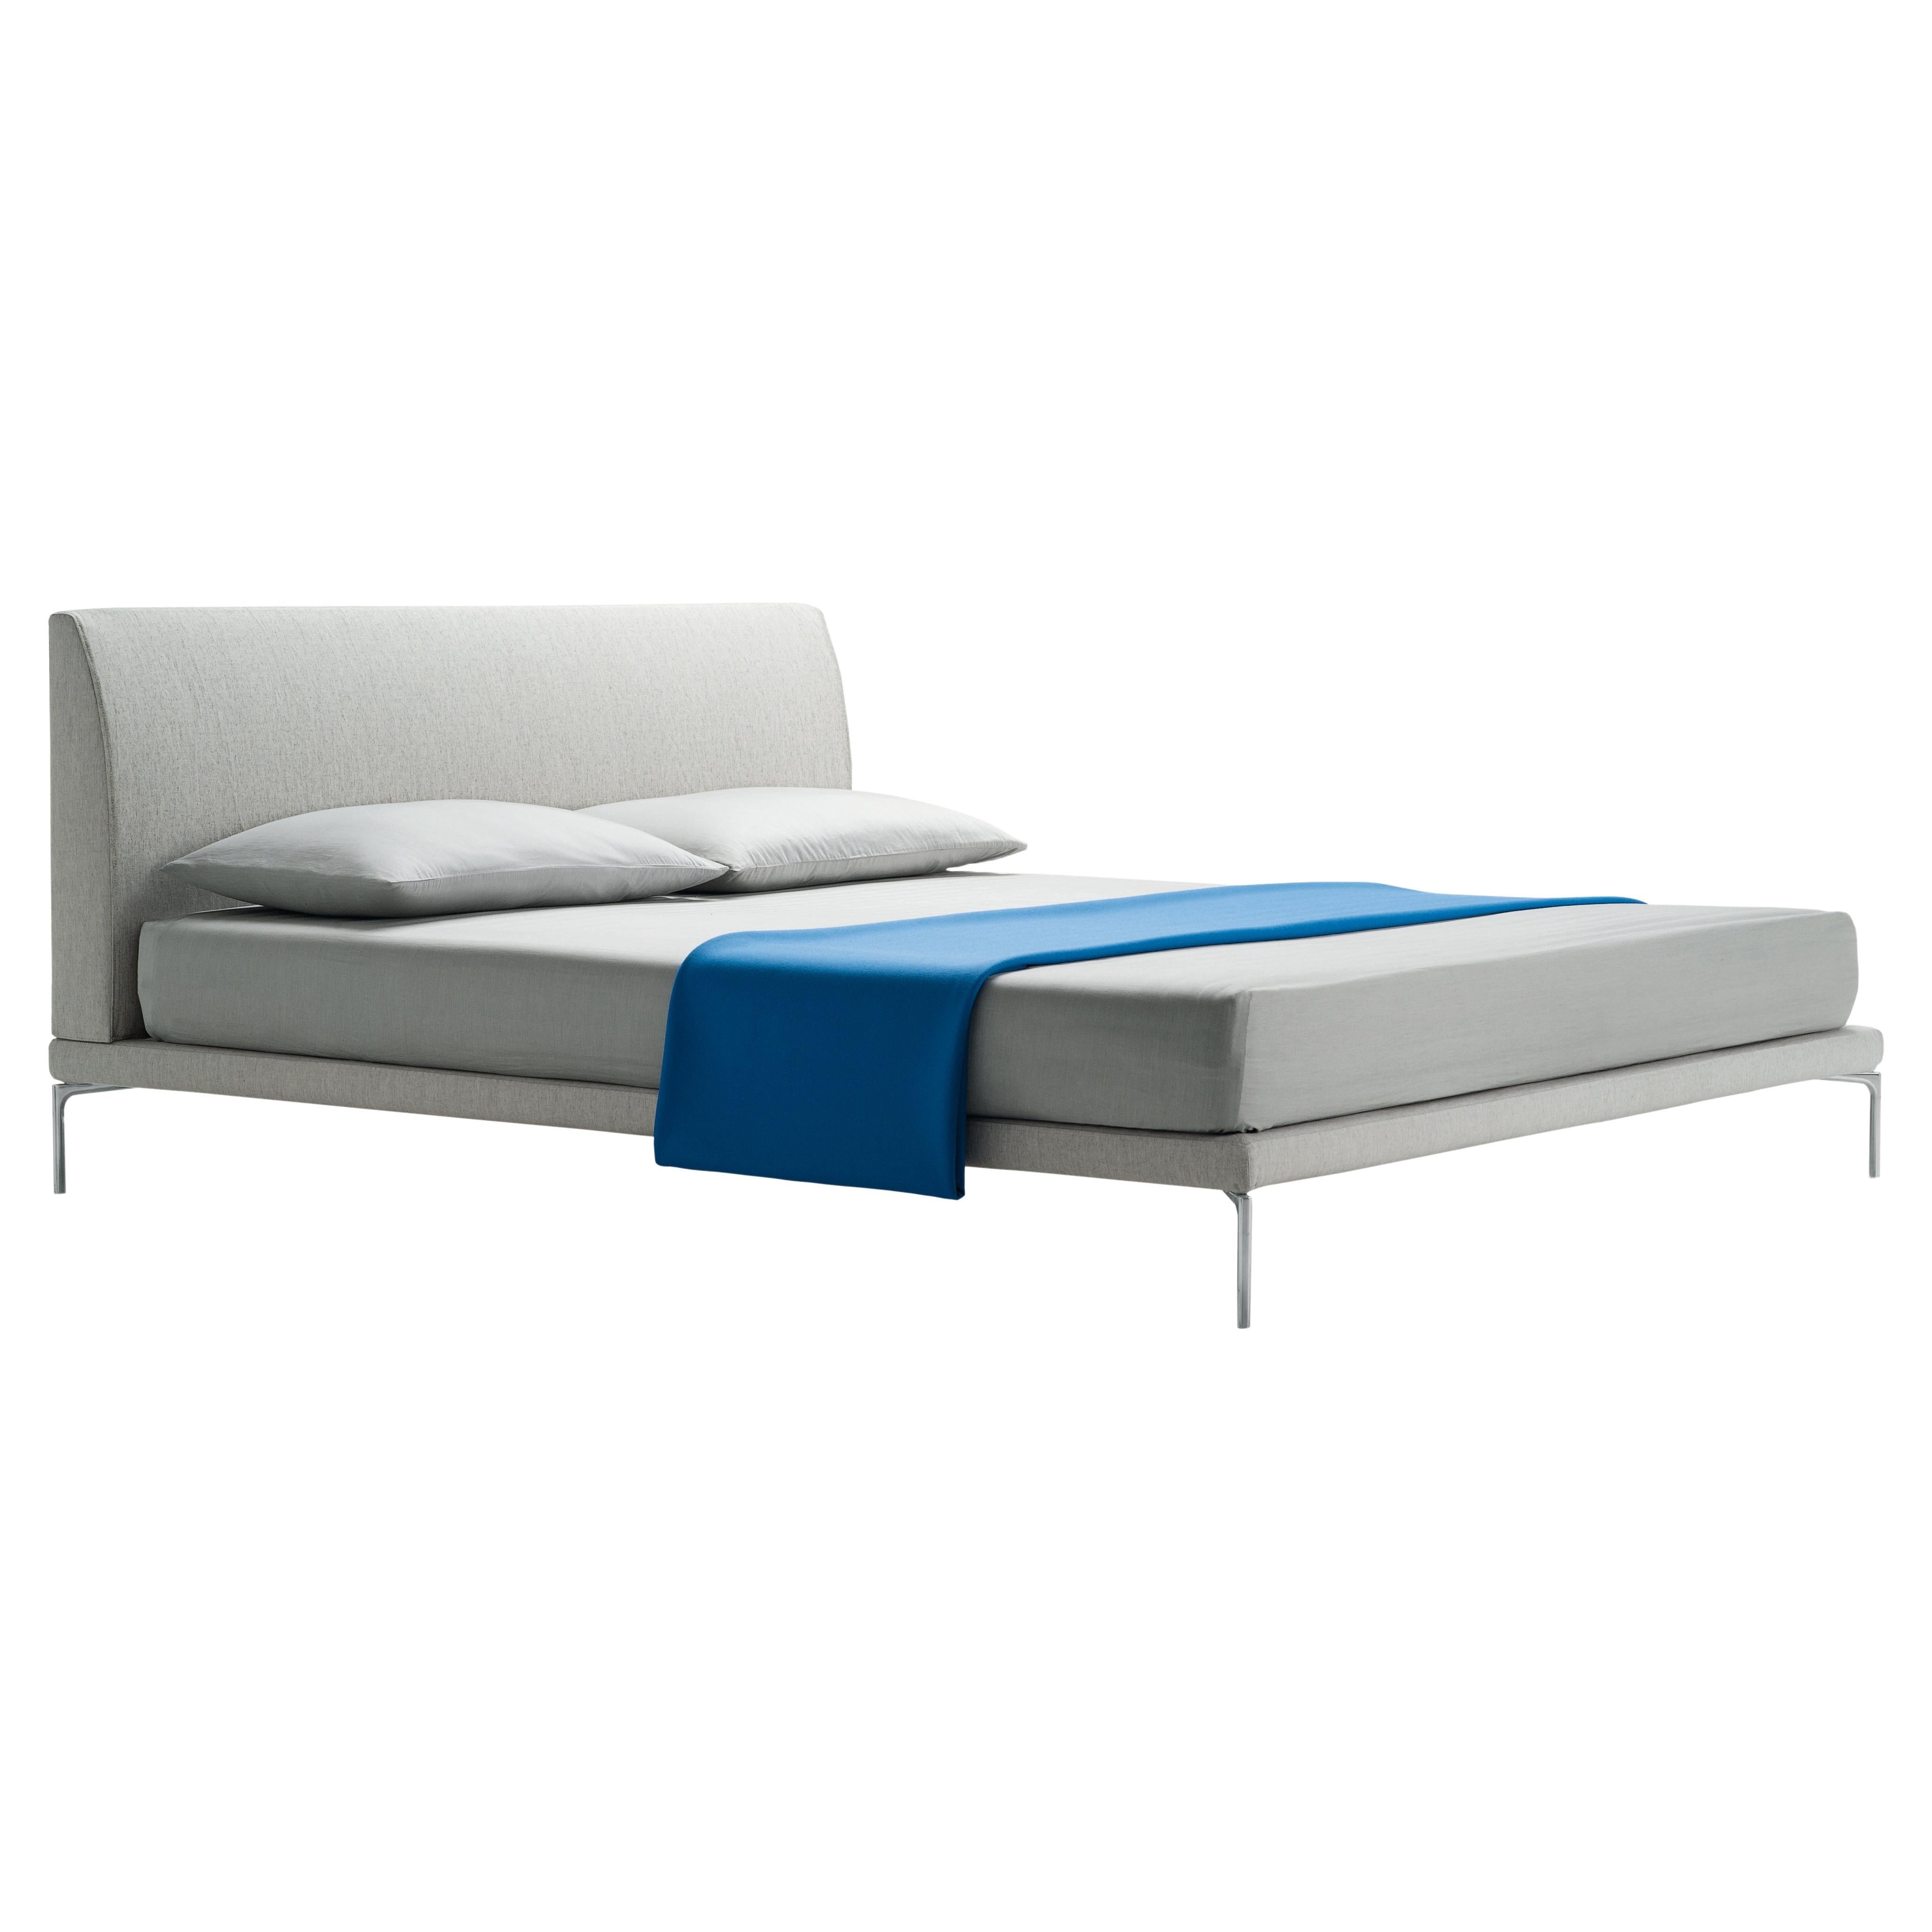 Zanotta Medium Talamo Bed with Single Springing in Grey Upholstery For Sale